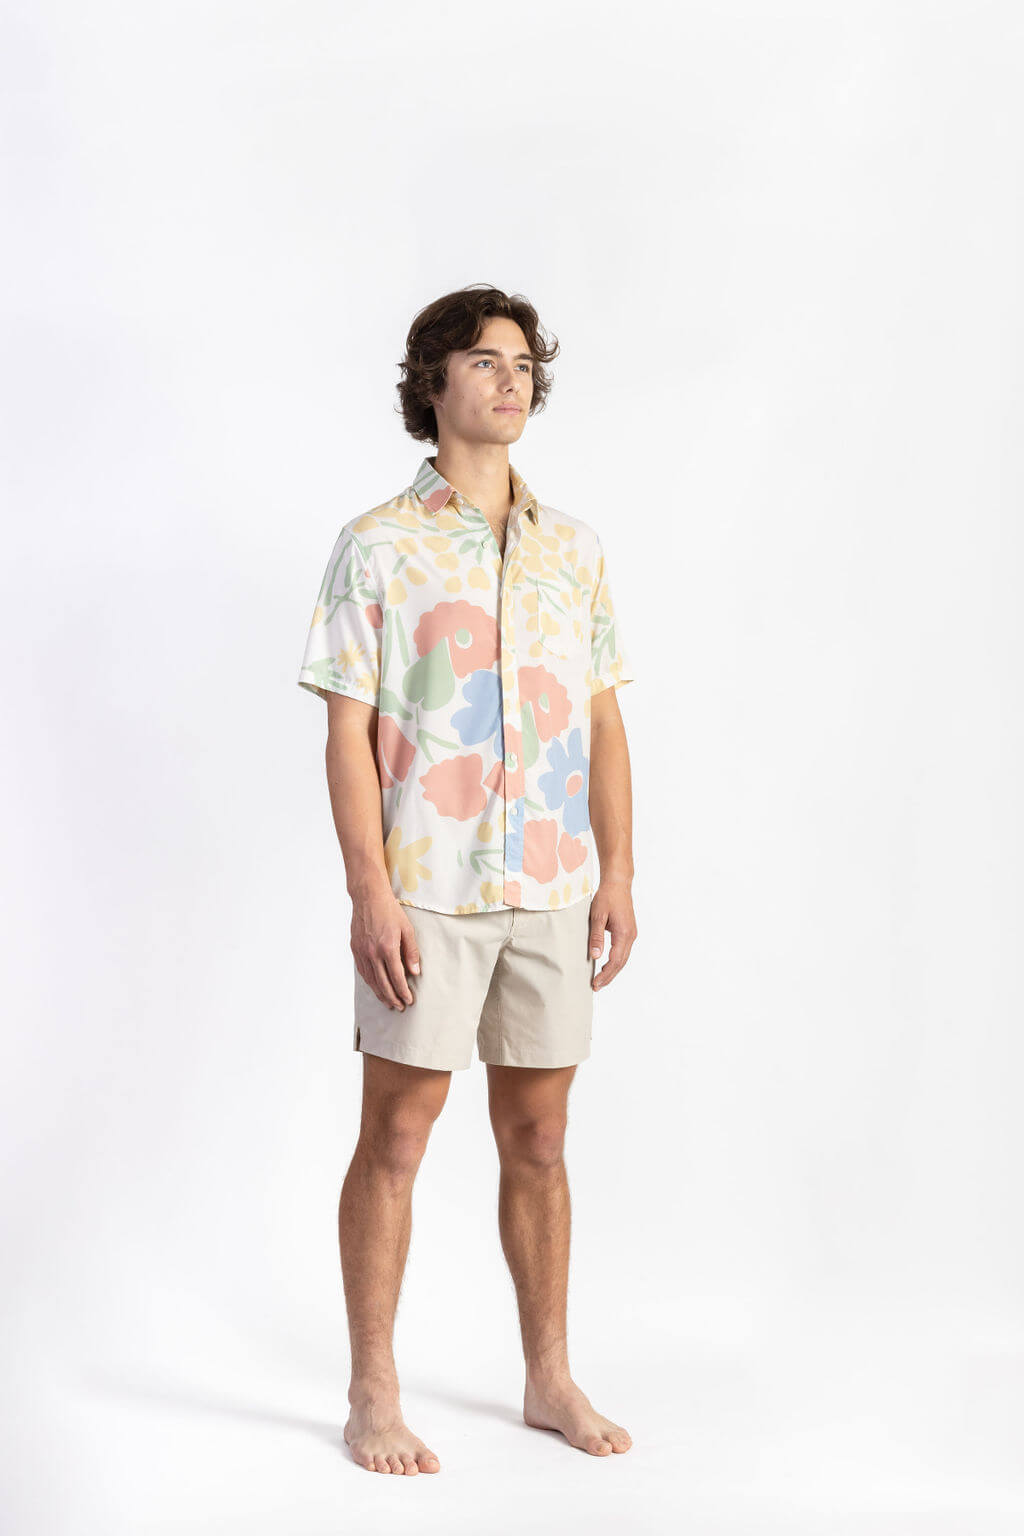 A man wearing a floral Breeze Button Up tee shirt with off white shorts